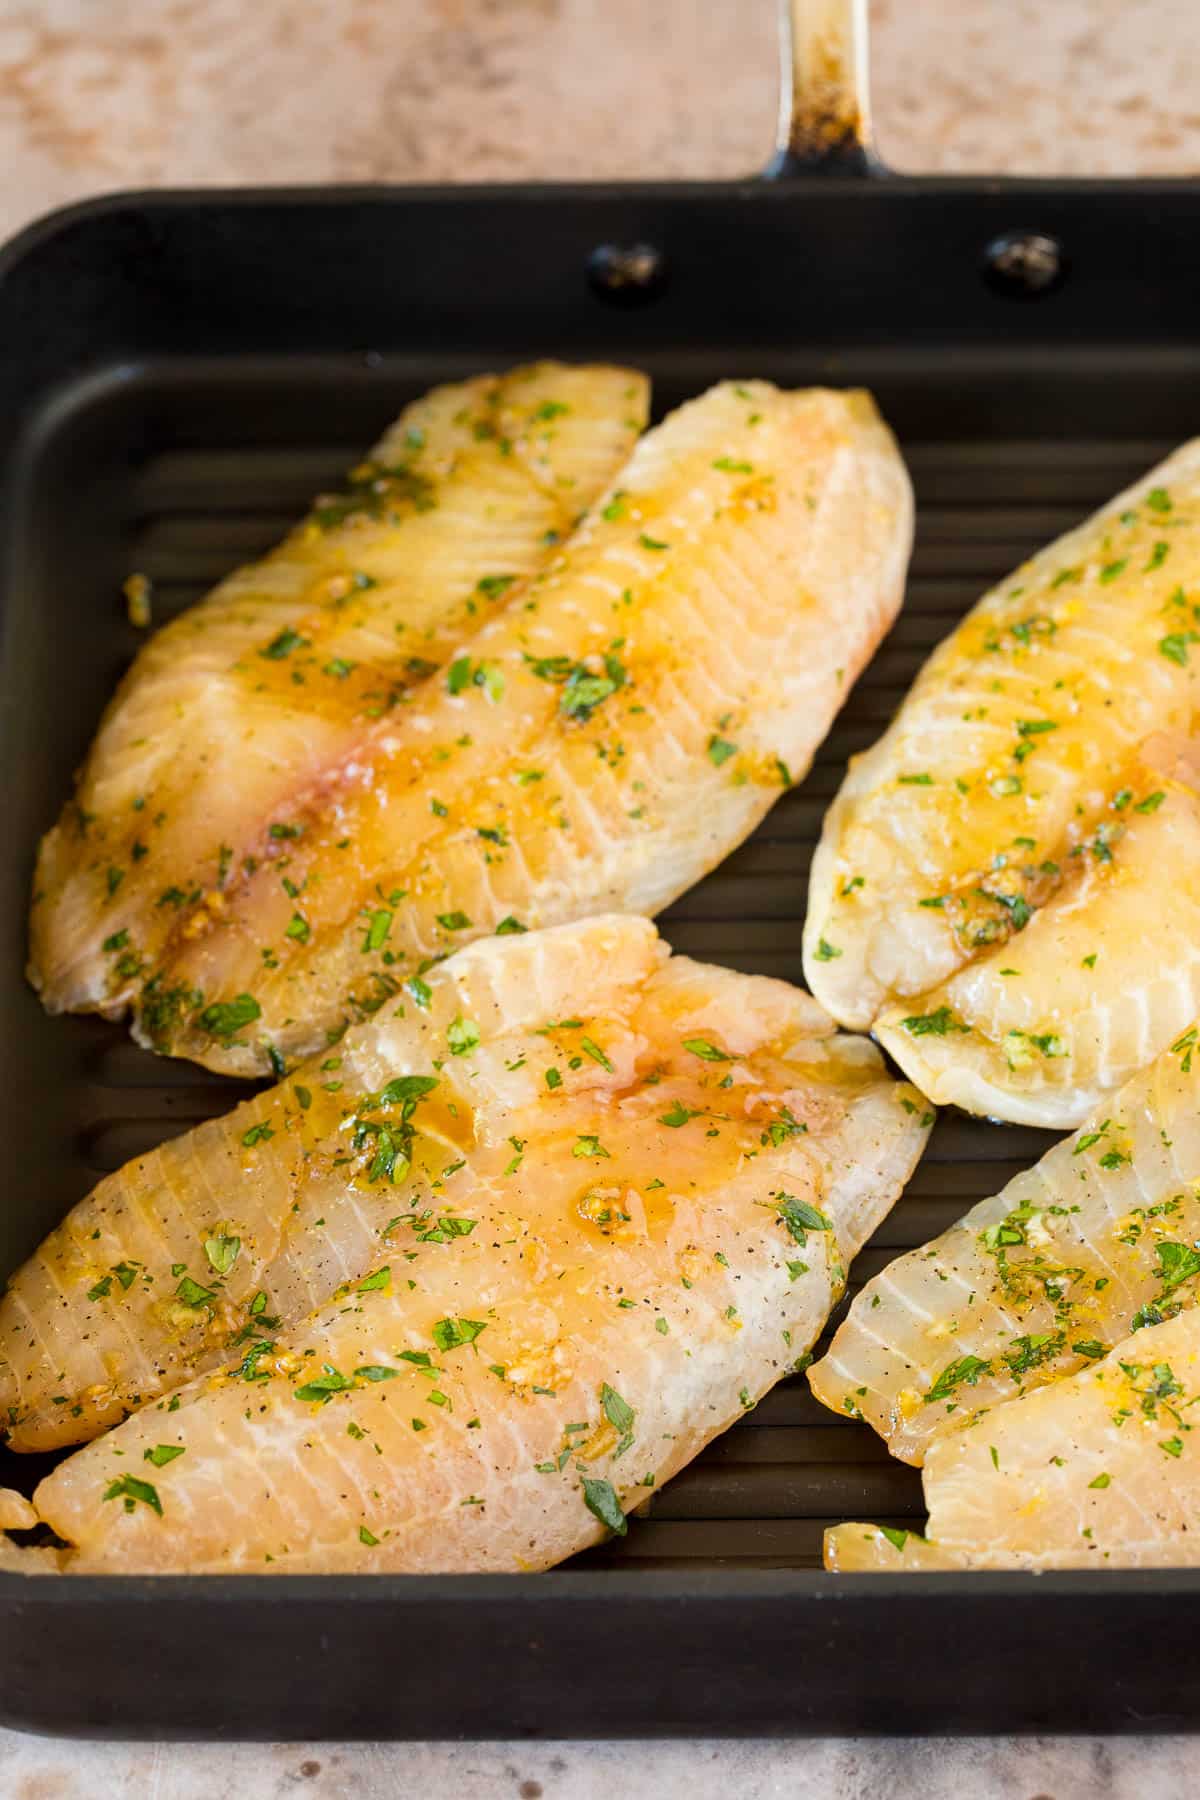 Marinated fish fillets on a grill pan.